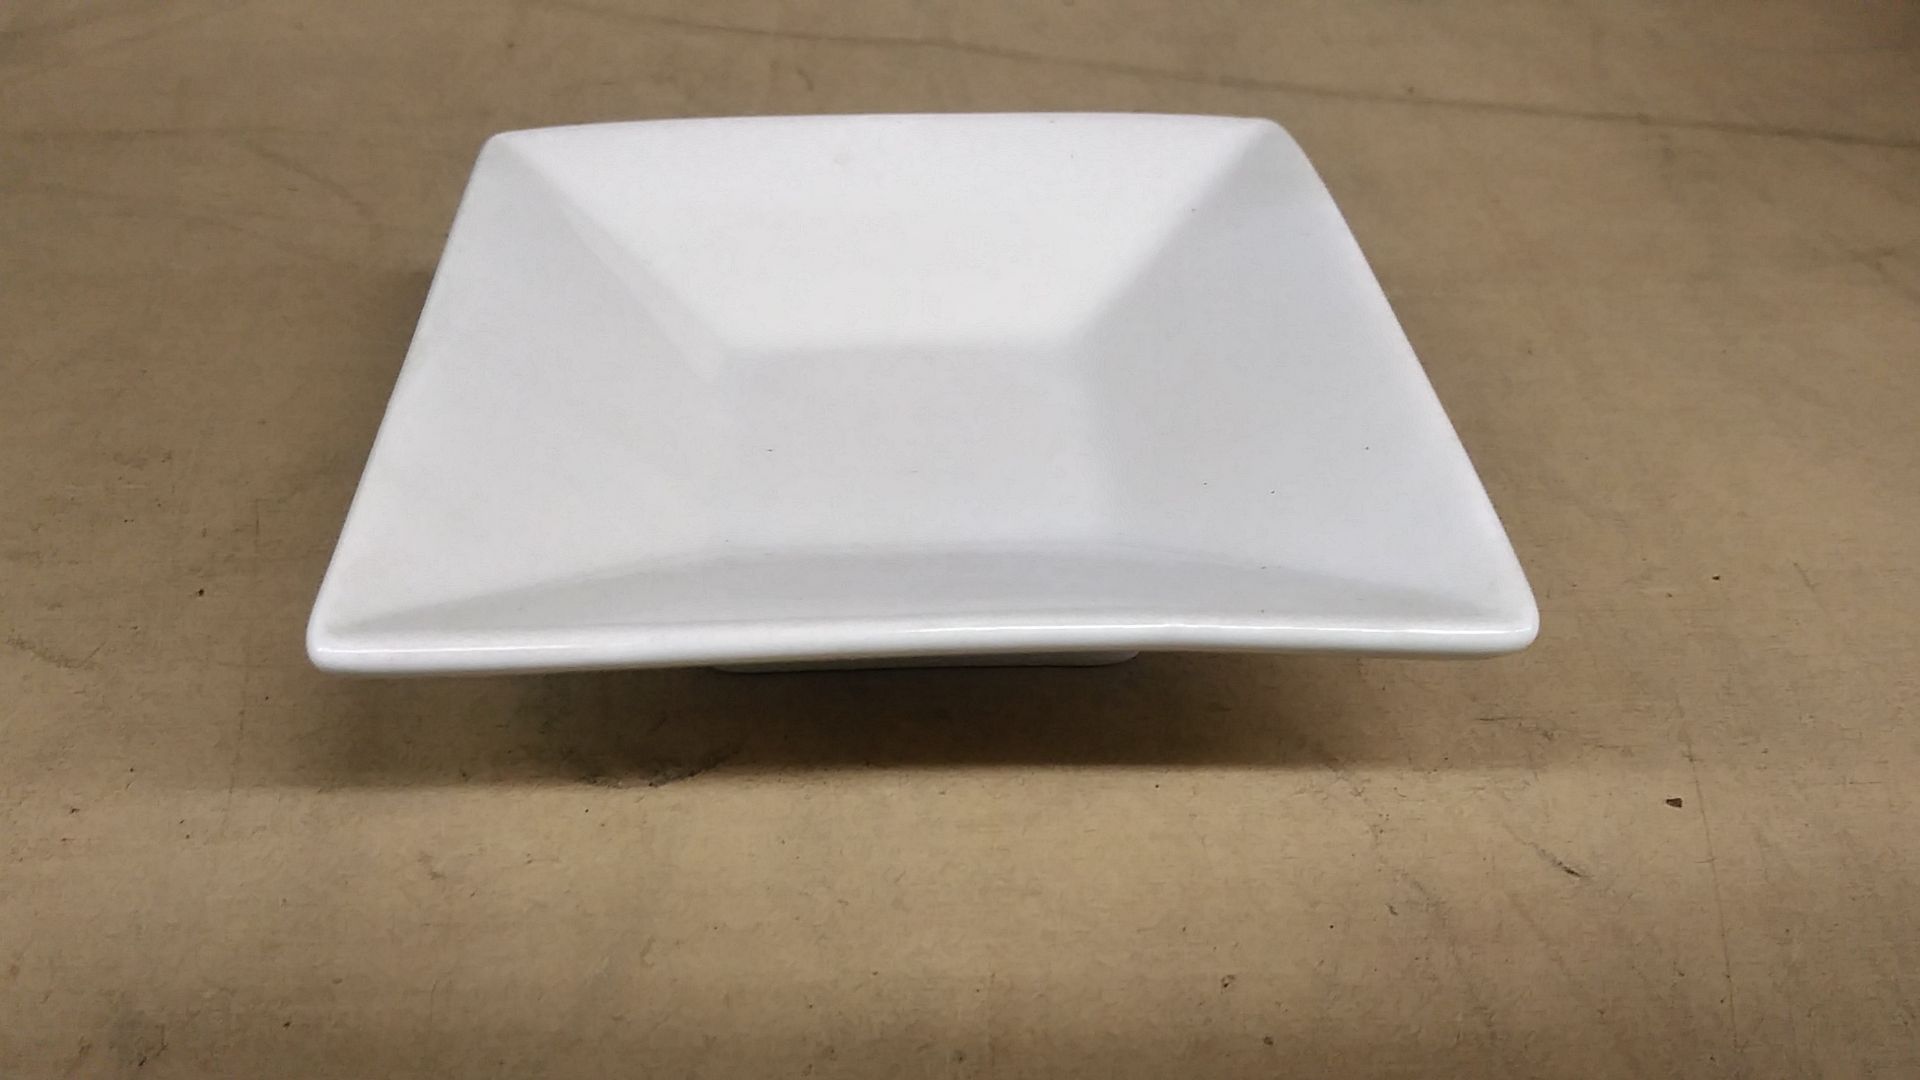 4.5" SQUARE DISHES BY BUFFALO BRIGHT WHITE COLOR (INCLUDES QTY 20)